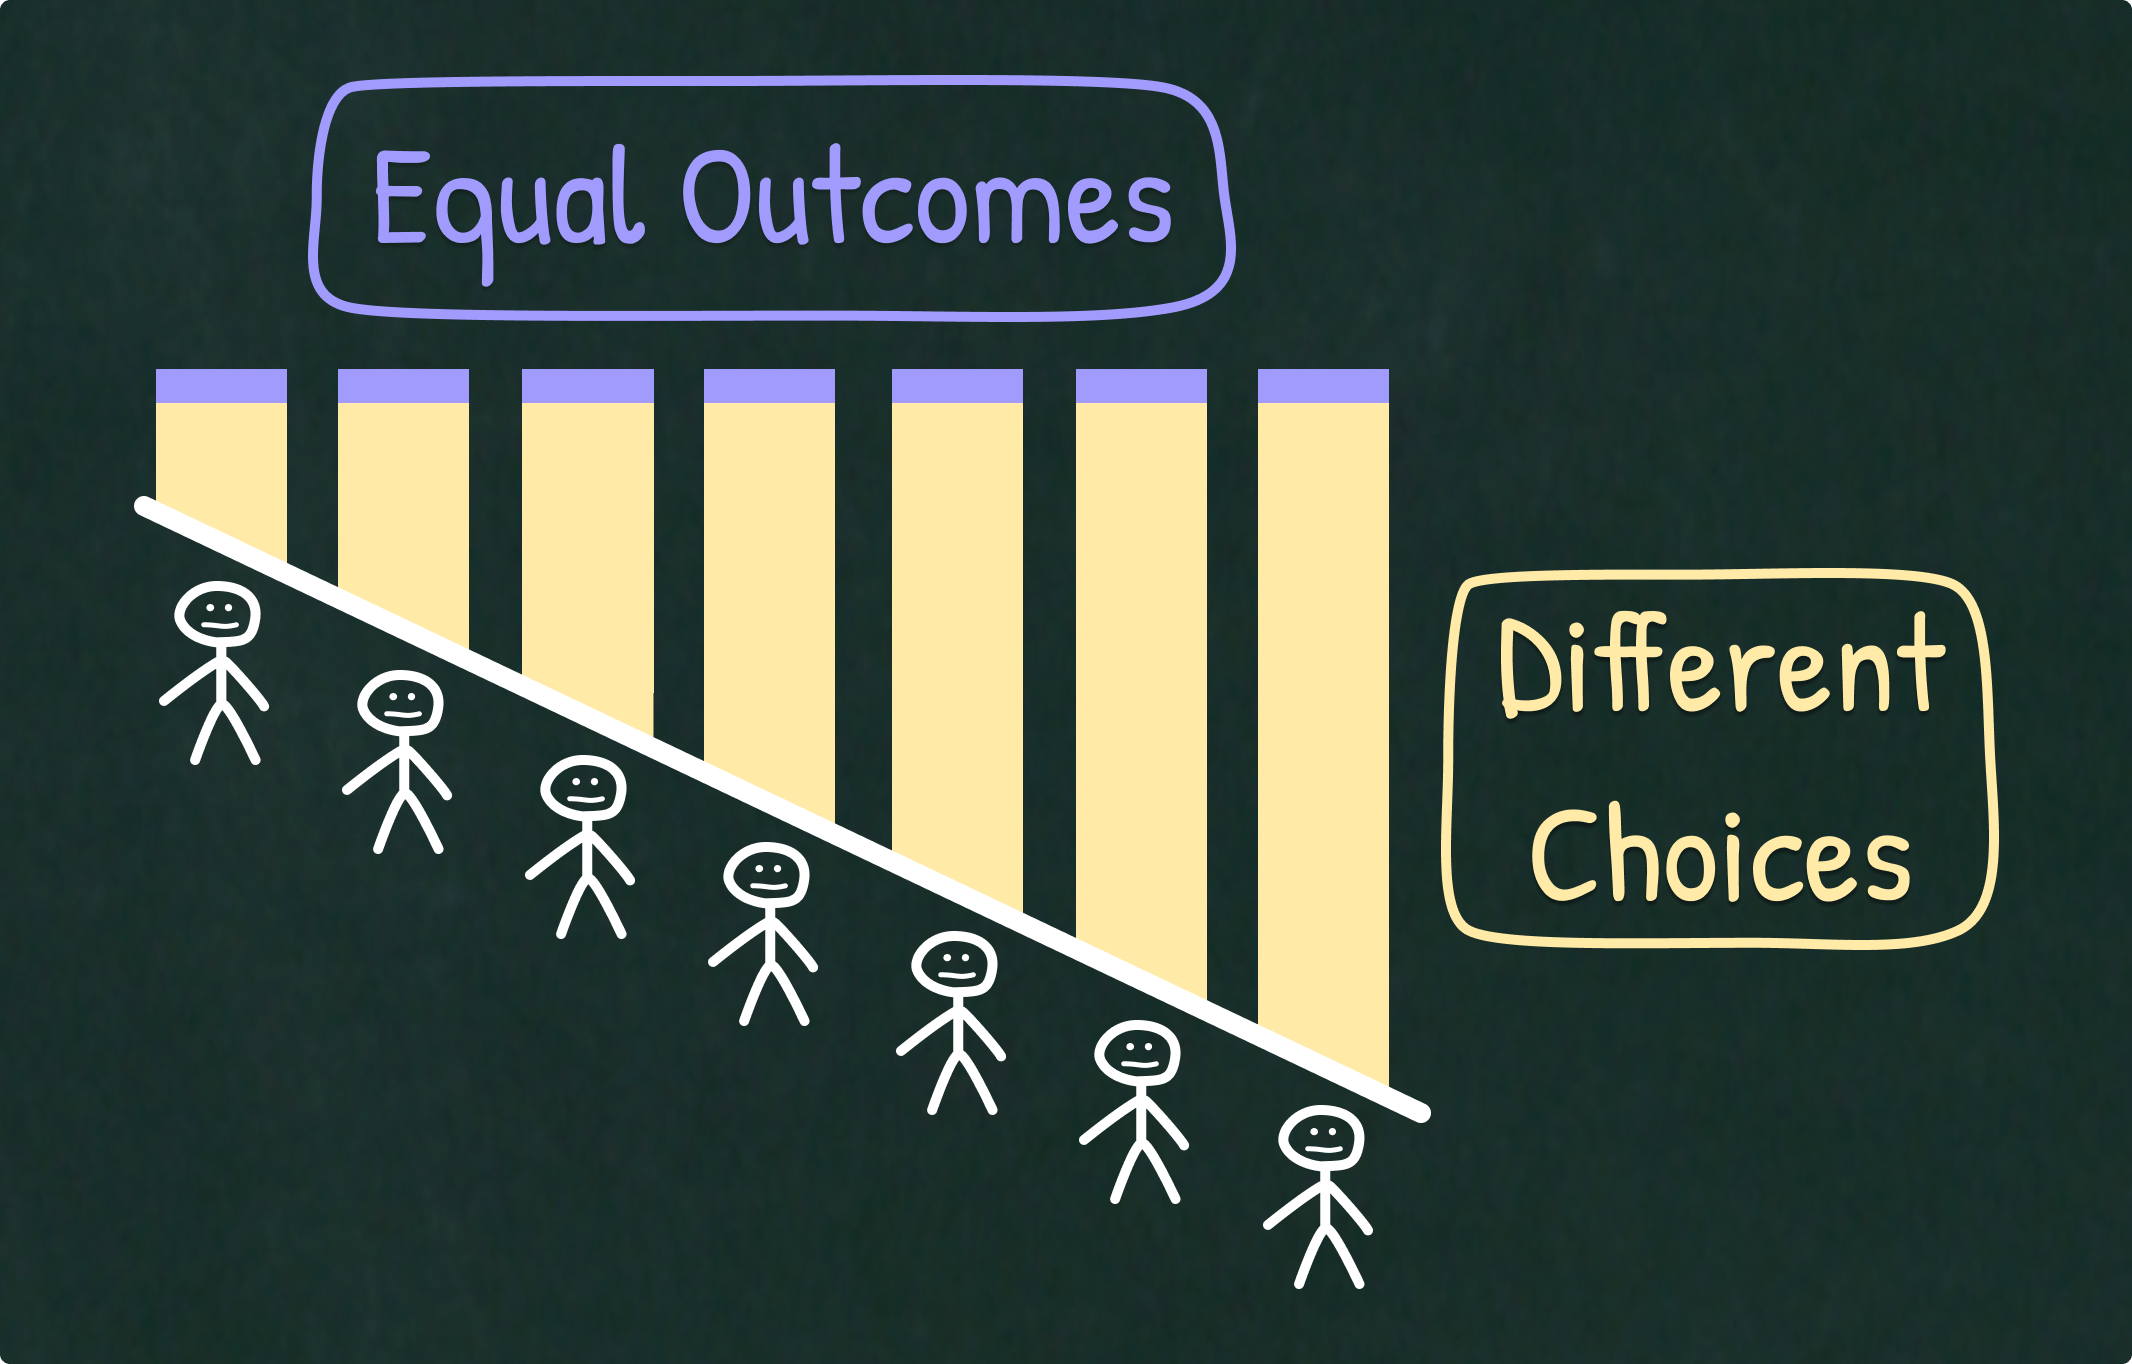 Illustration shows a system in which people make different choices, but get the same results.